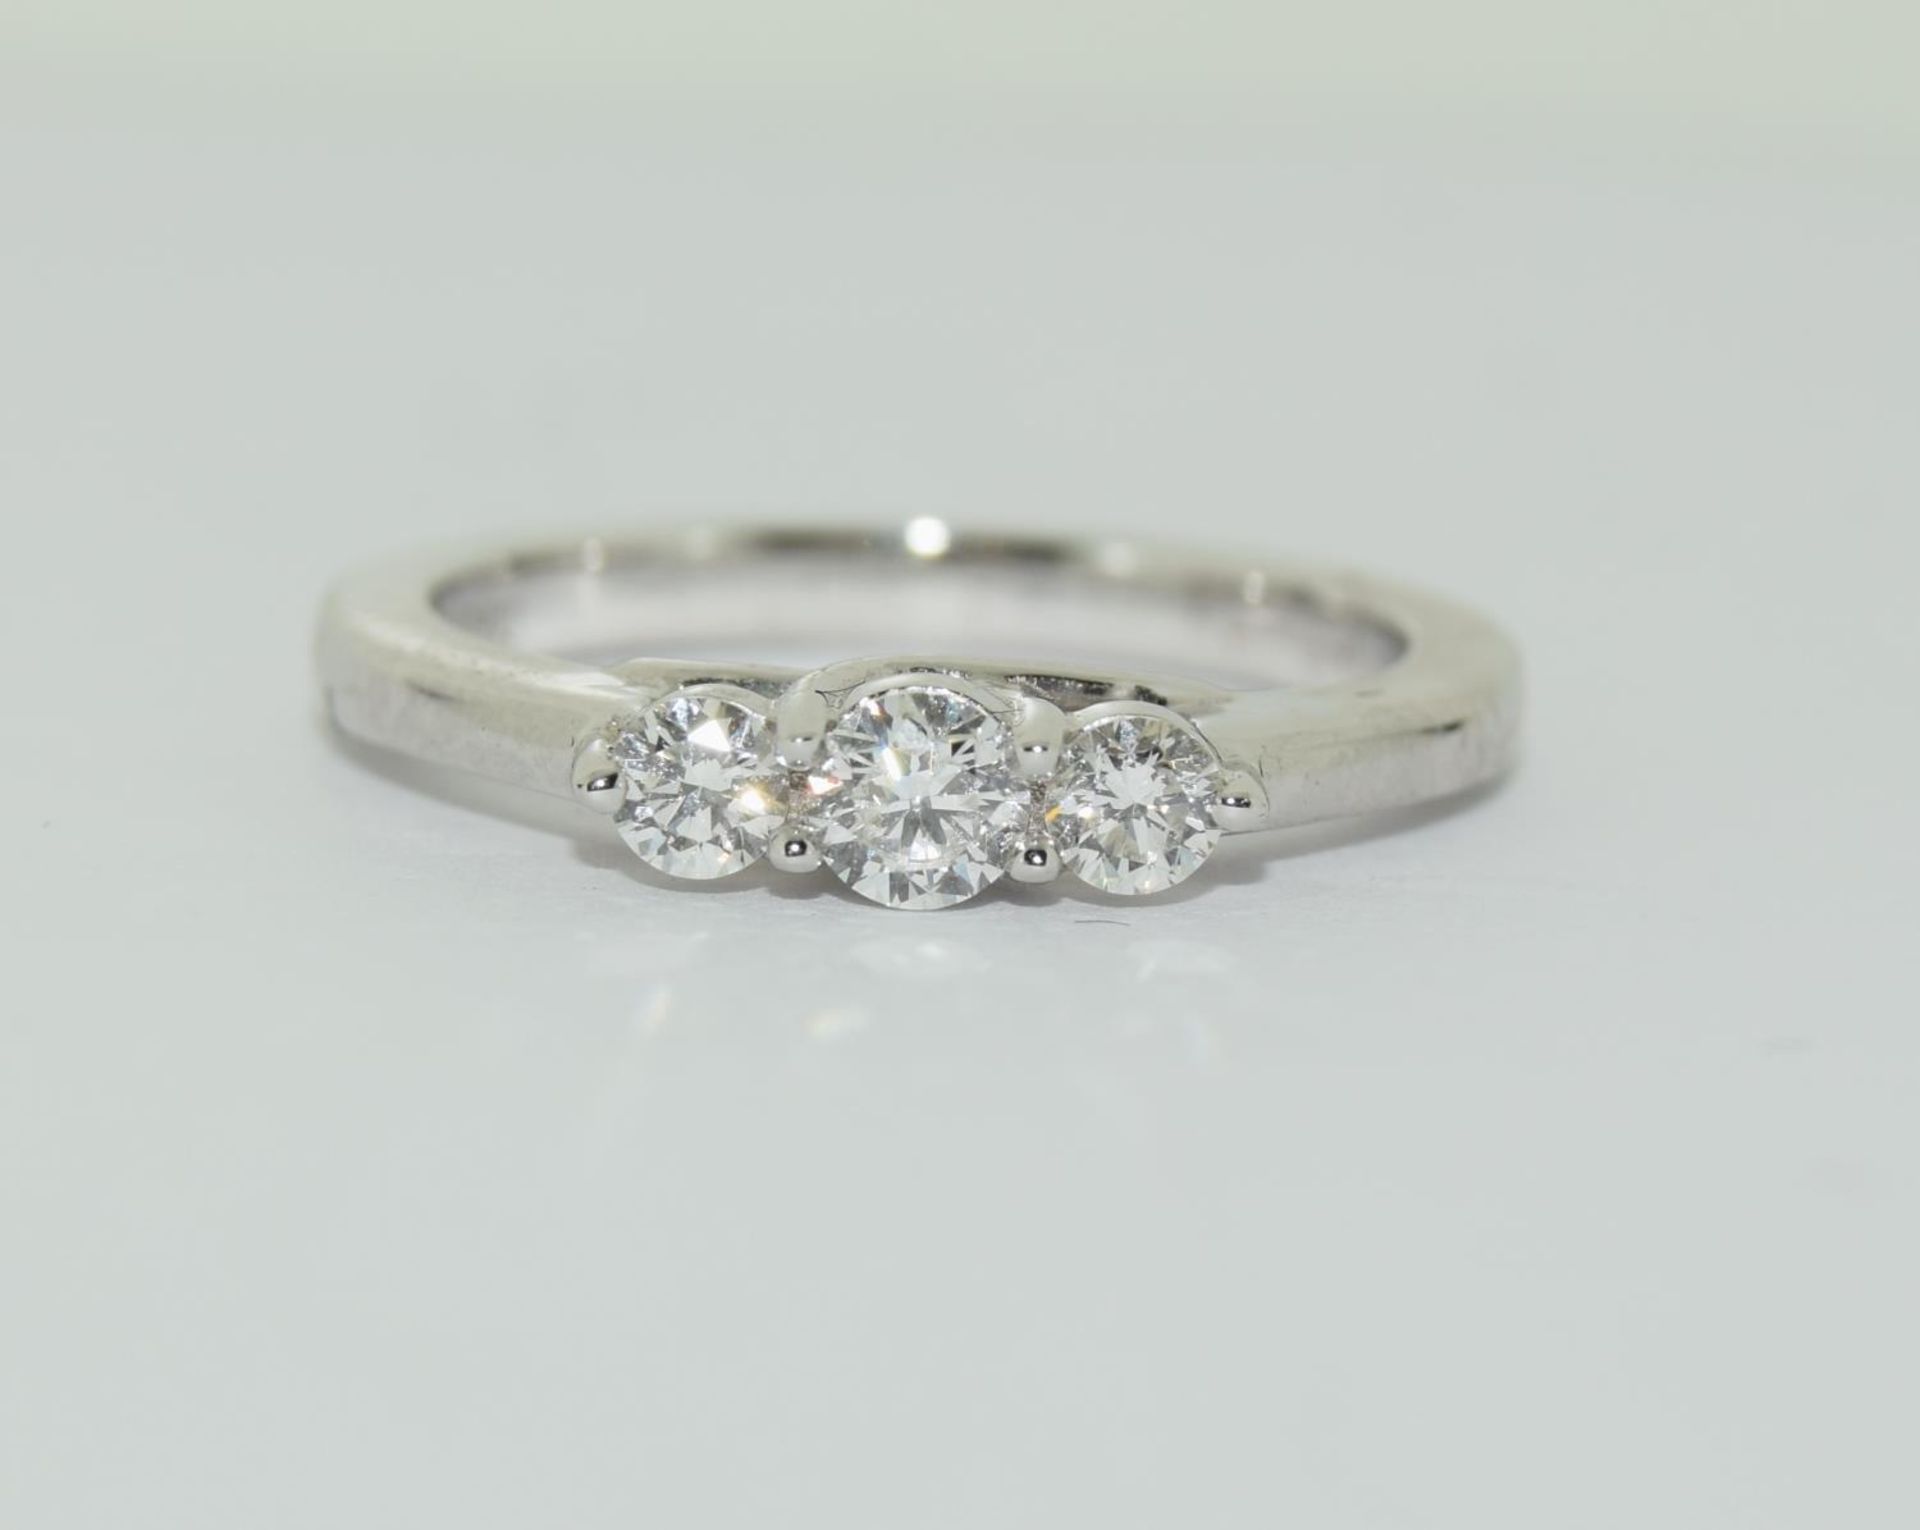 An 18ct white gold 3 graduated, claw set brilliant cut diamonds ring, total diamond weight 0.33ct.